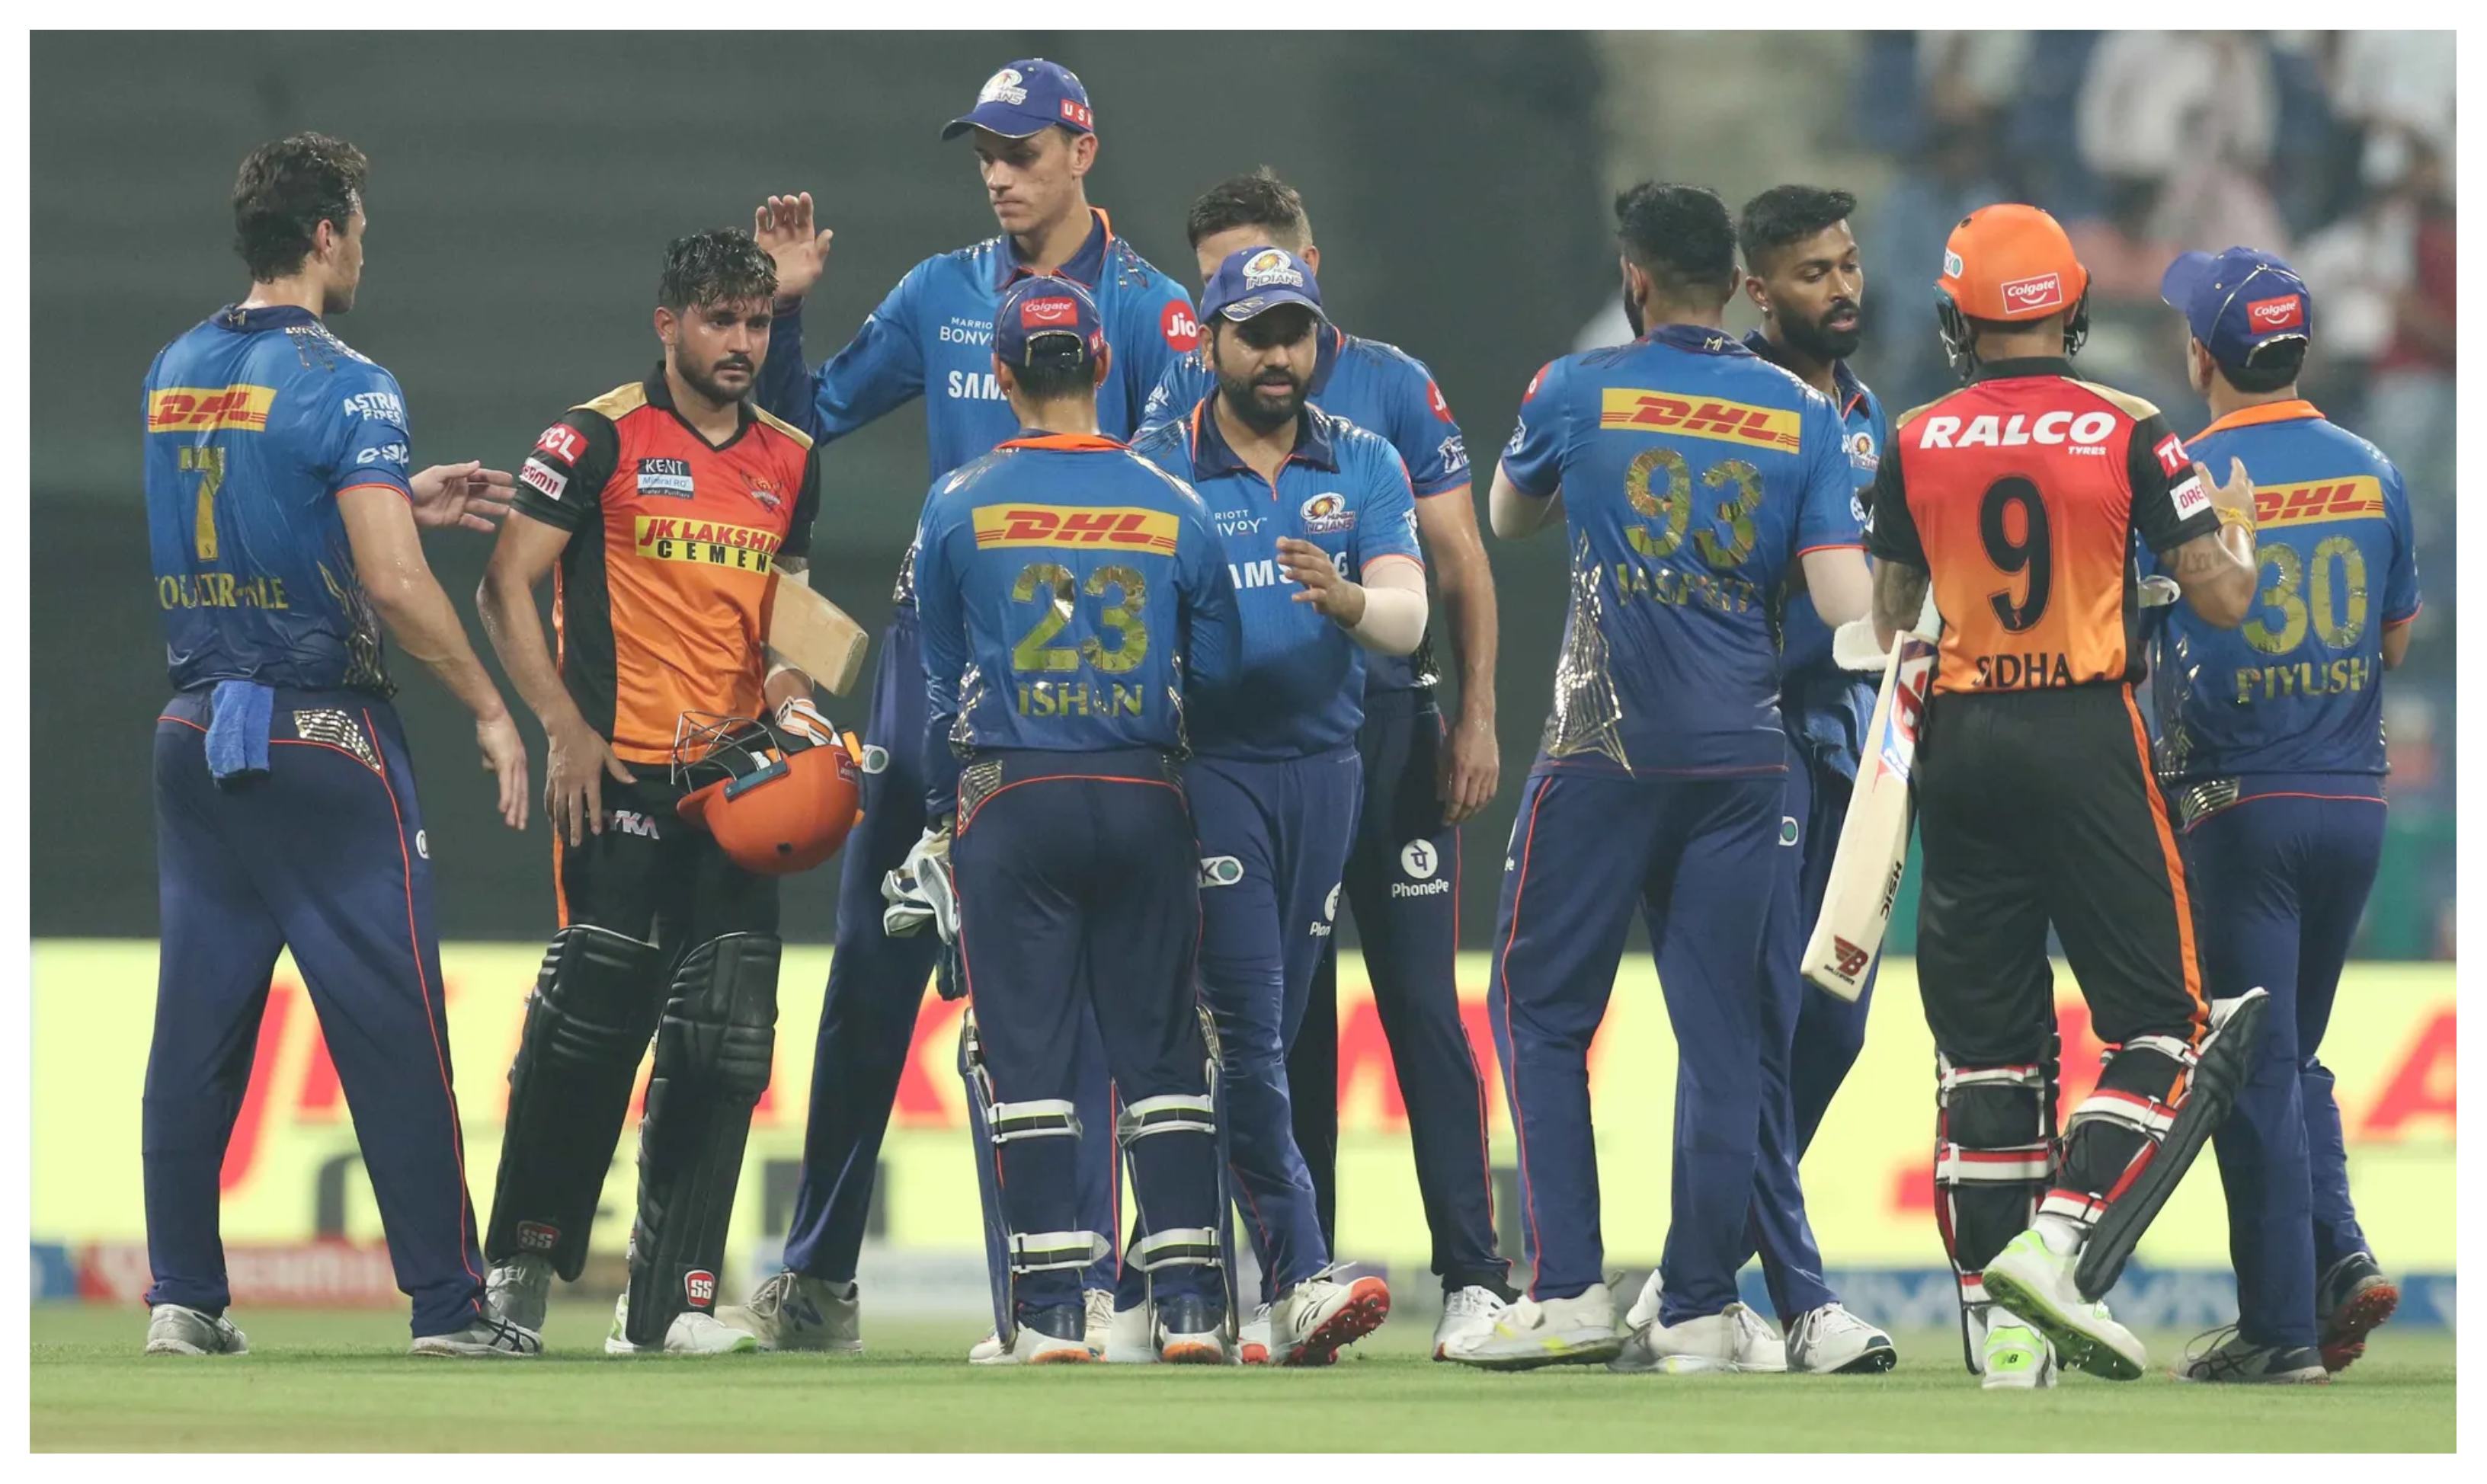 MI ended their campaign with a big win over SRH | BCCI/IPL